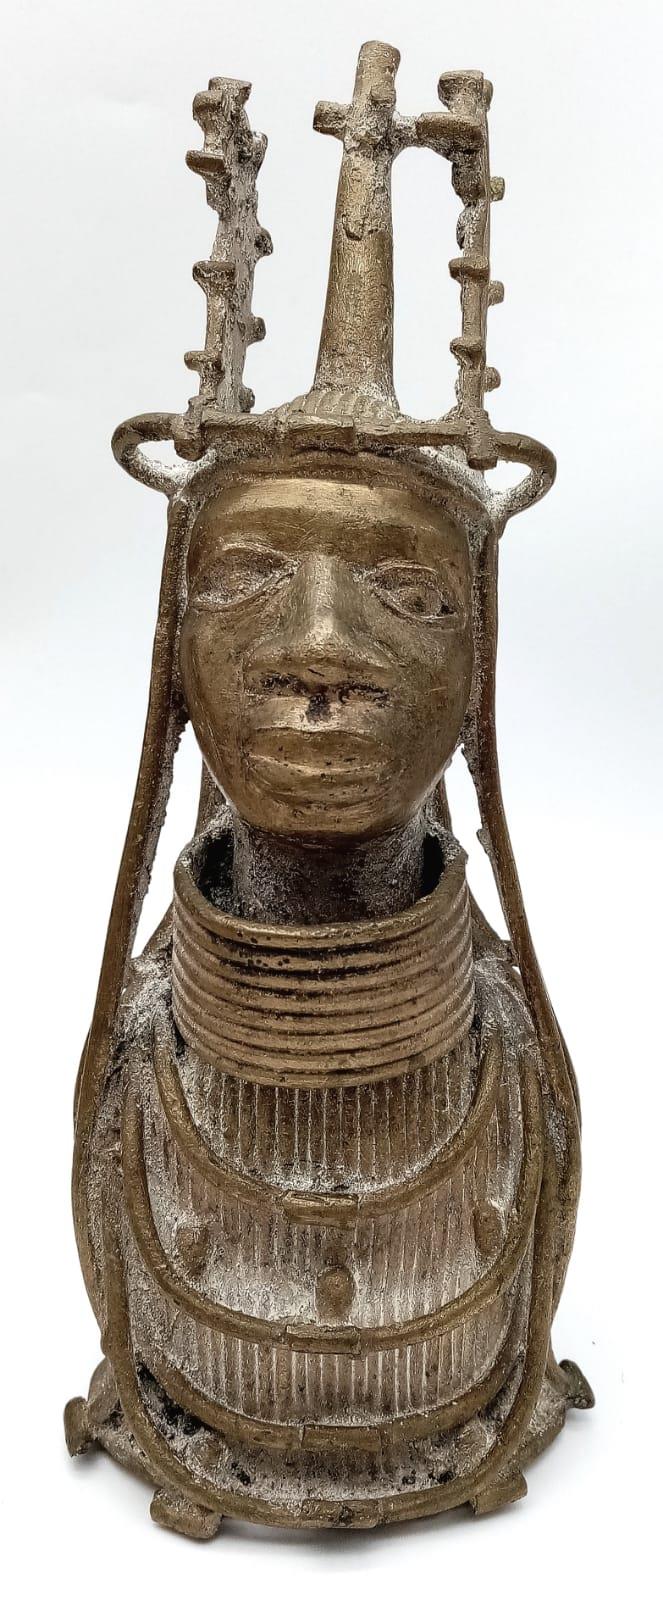 A Unique African Statue. Magnetically tested, no attraction, and when tapped produces a nice ring.